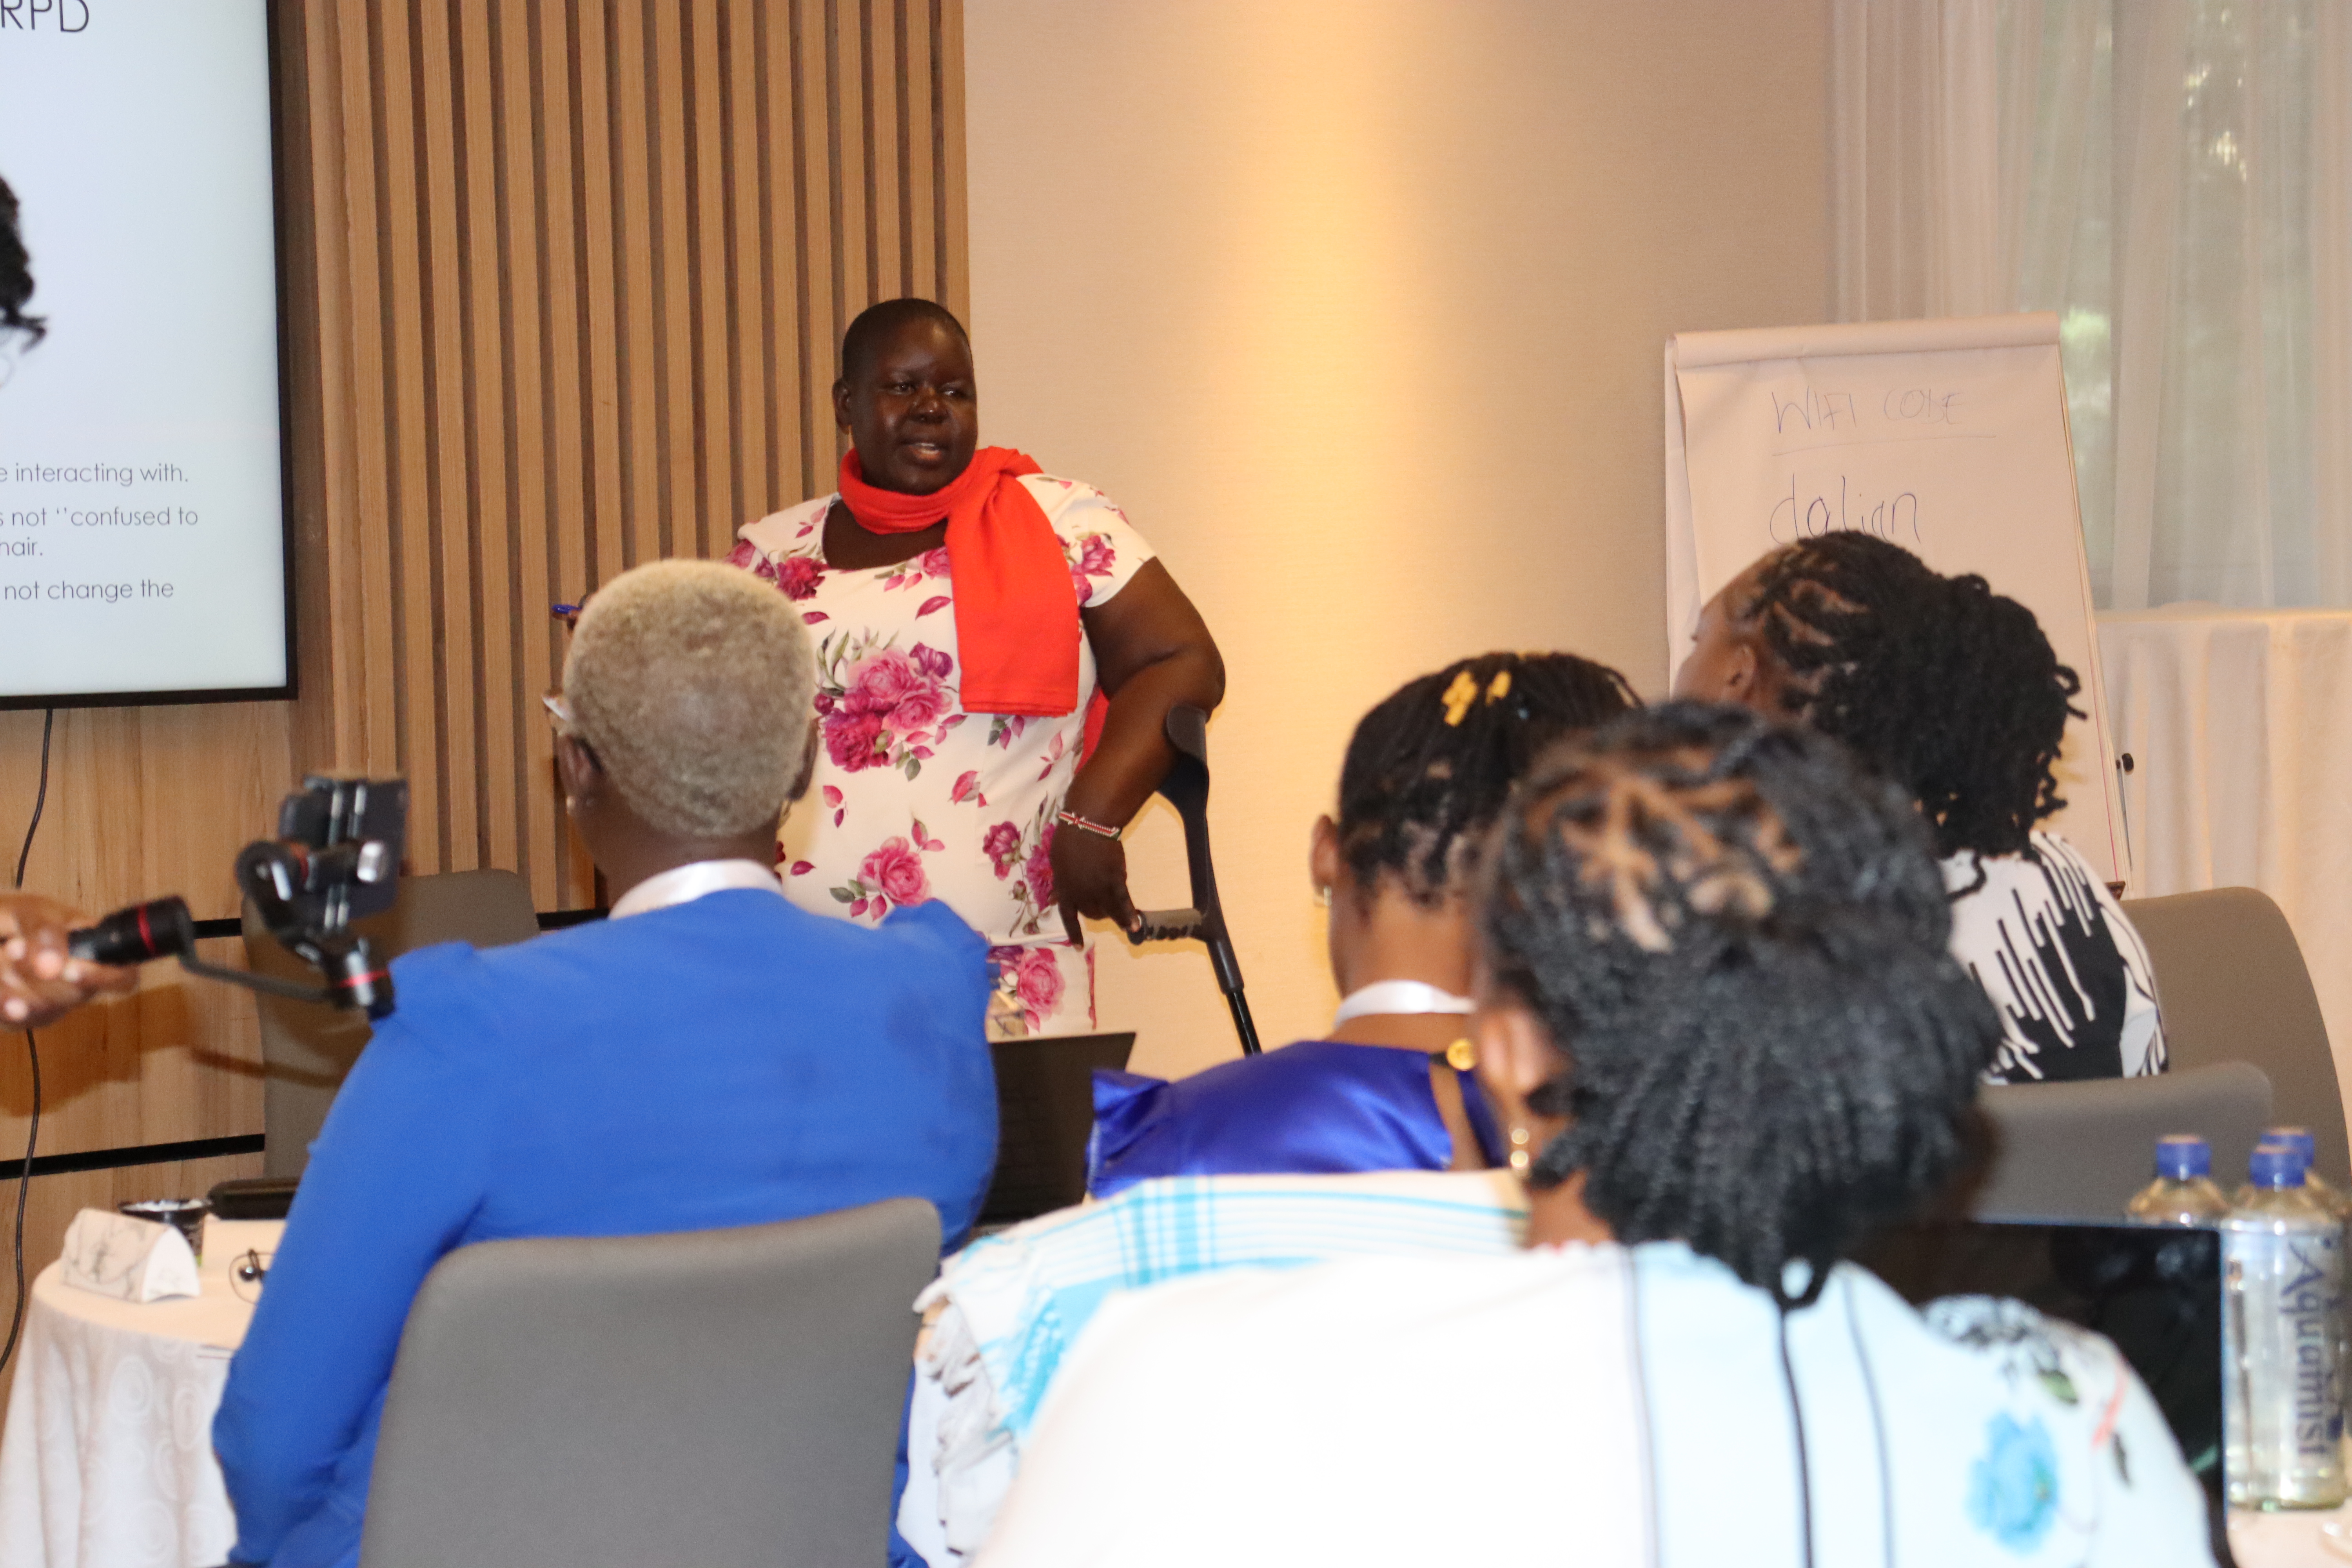 Advisor to the Governor of Kisumu County in Kenya on Disability Inclusion, Honorable Caroline Agwanda trains participants during the fifth edition of FAWE-convened Women In Political Participation Academy (WPP) Academy in Nairobi, Kenya.  Photo: Olive Aseno